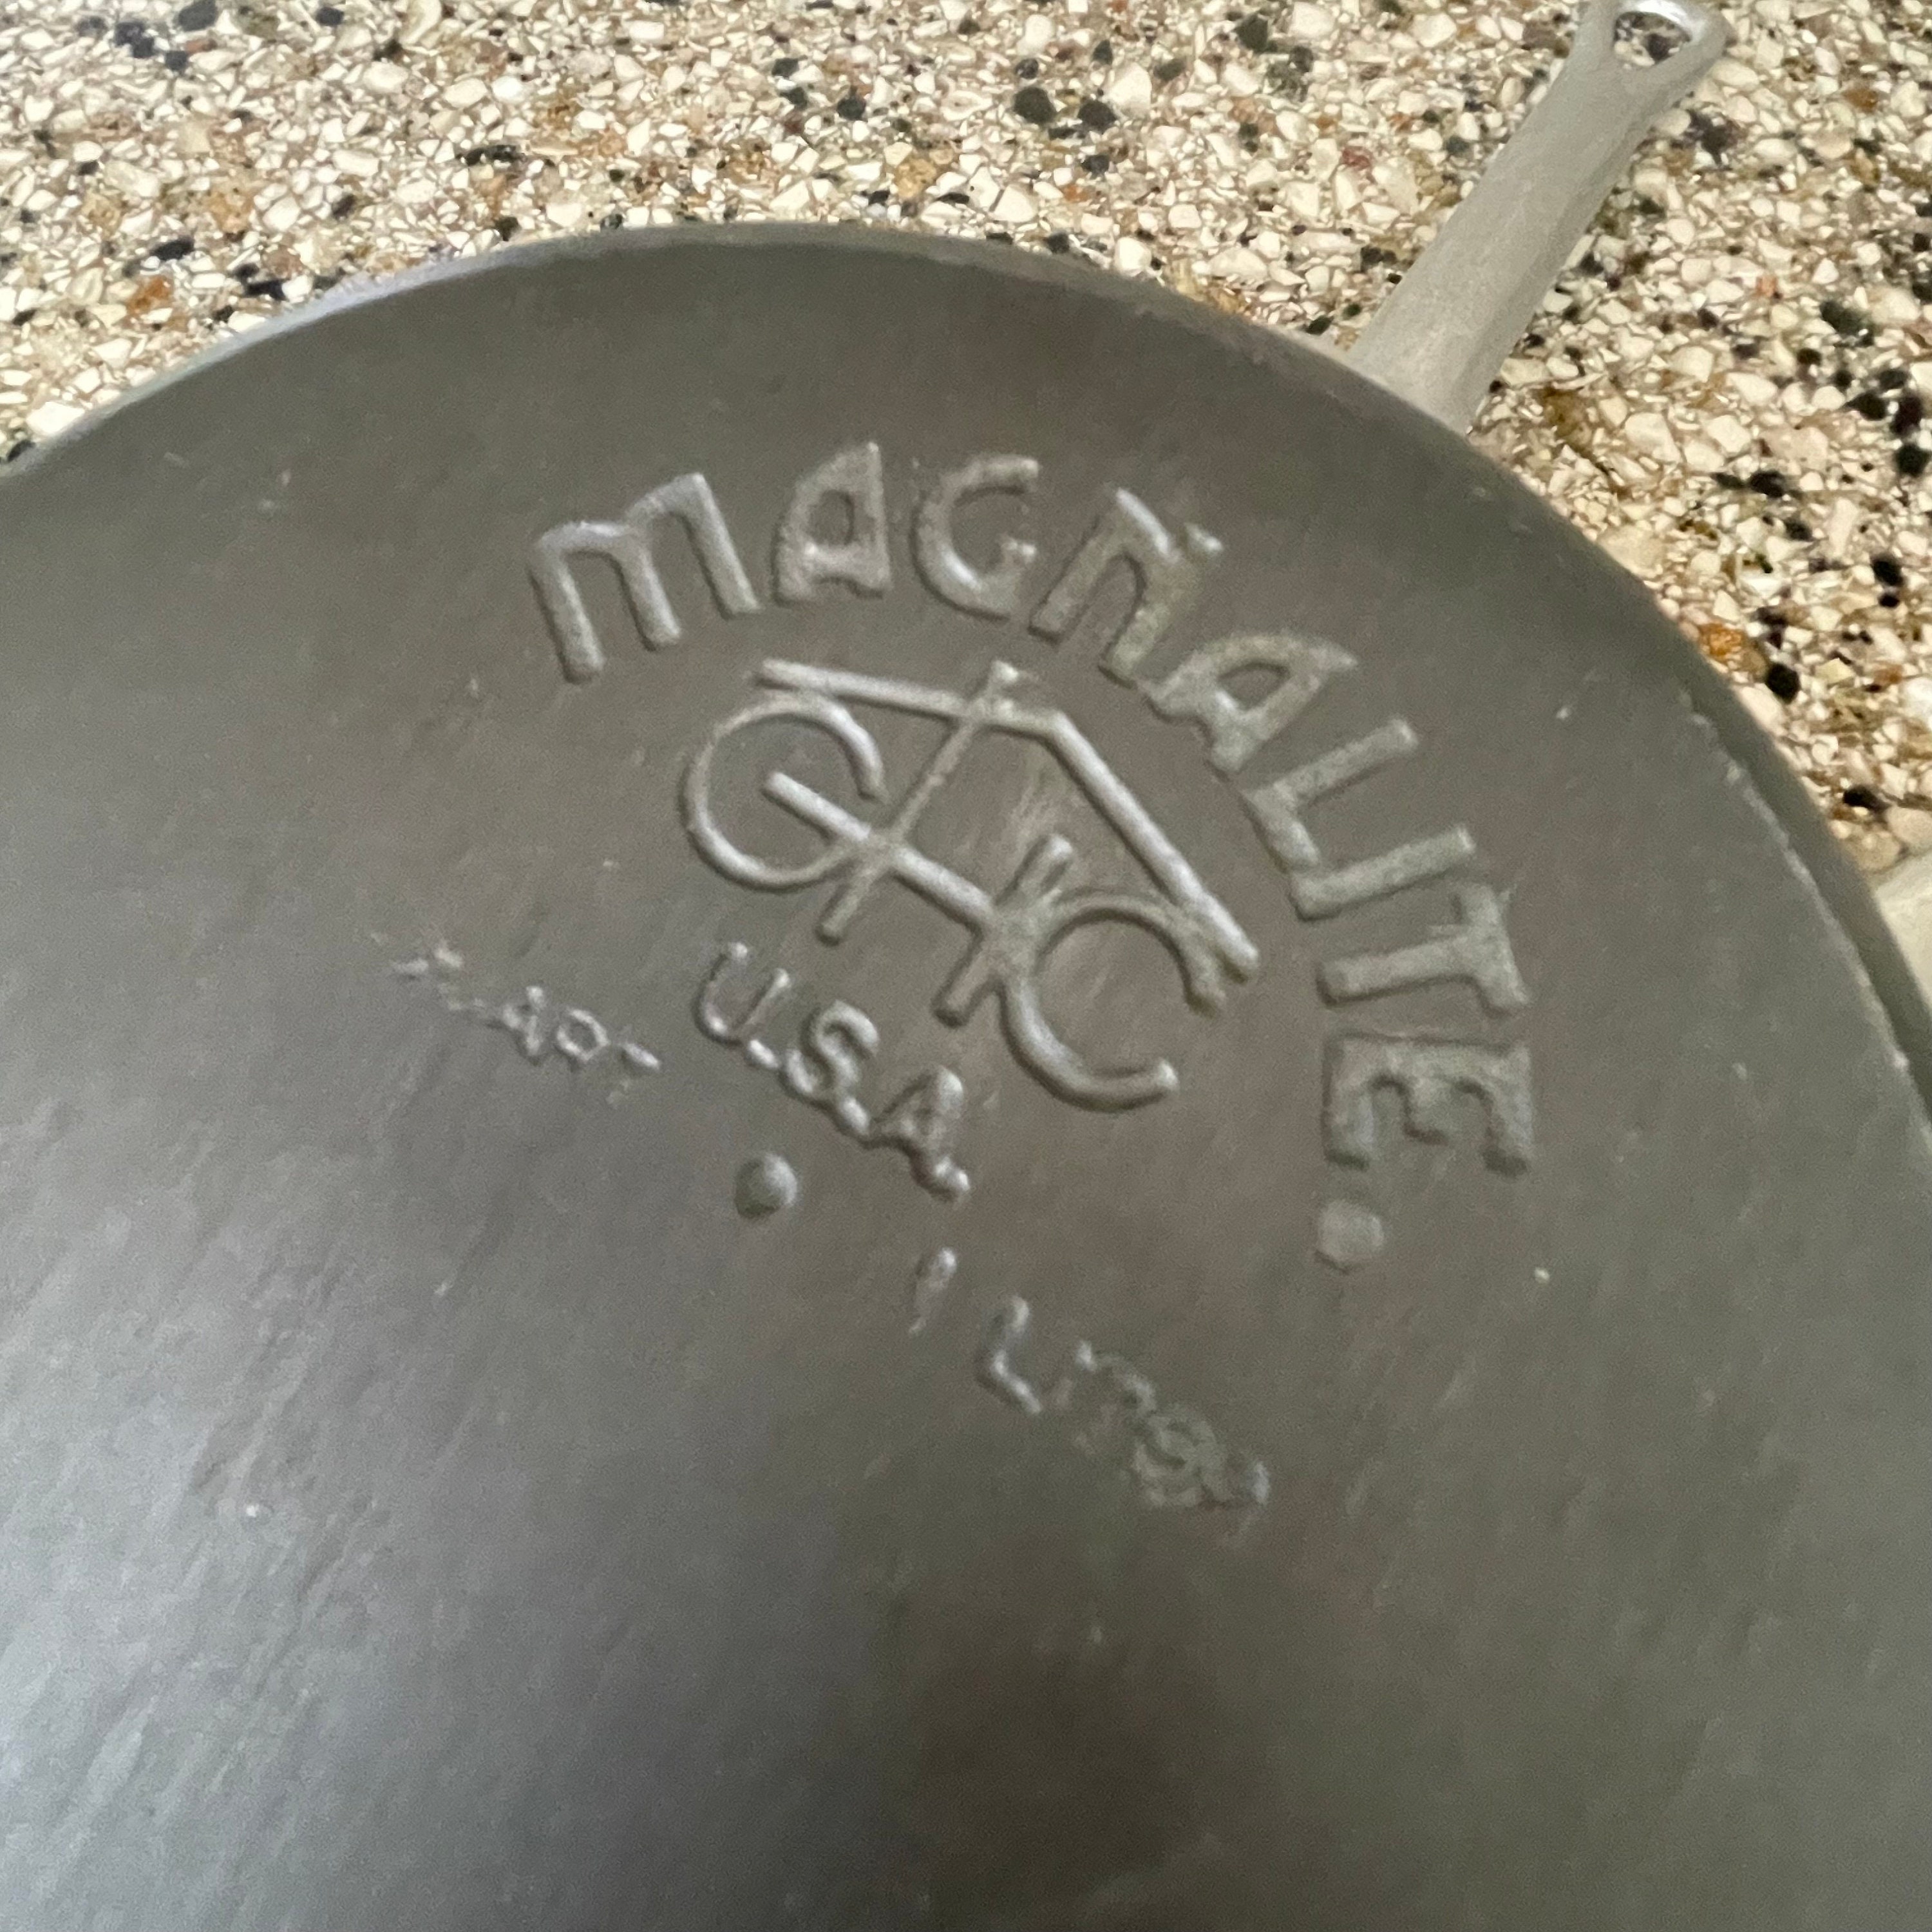 Magnalite Pro 1 Quart Saucepan With Lid by GHC Vintage General Household  Corp Magnalite Covered Pan Magnalite Saucepan Magpro Pan 